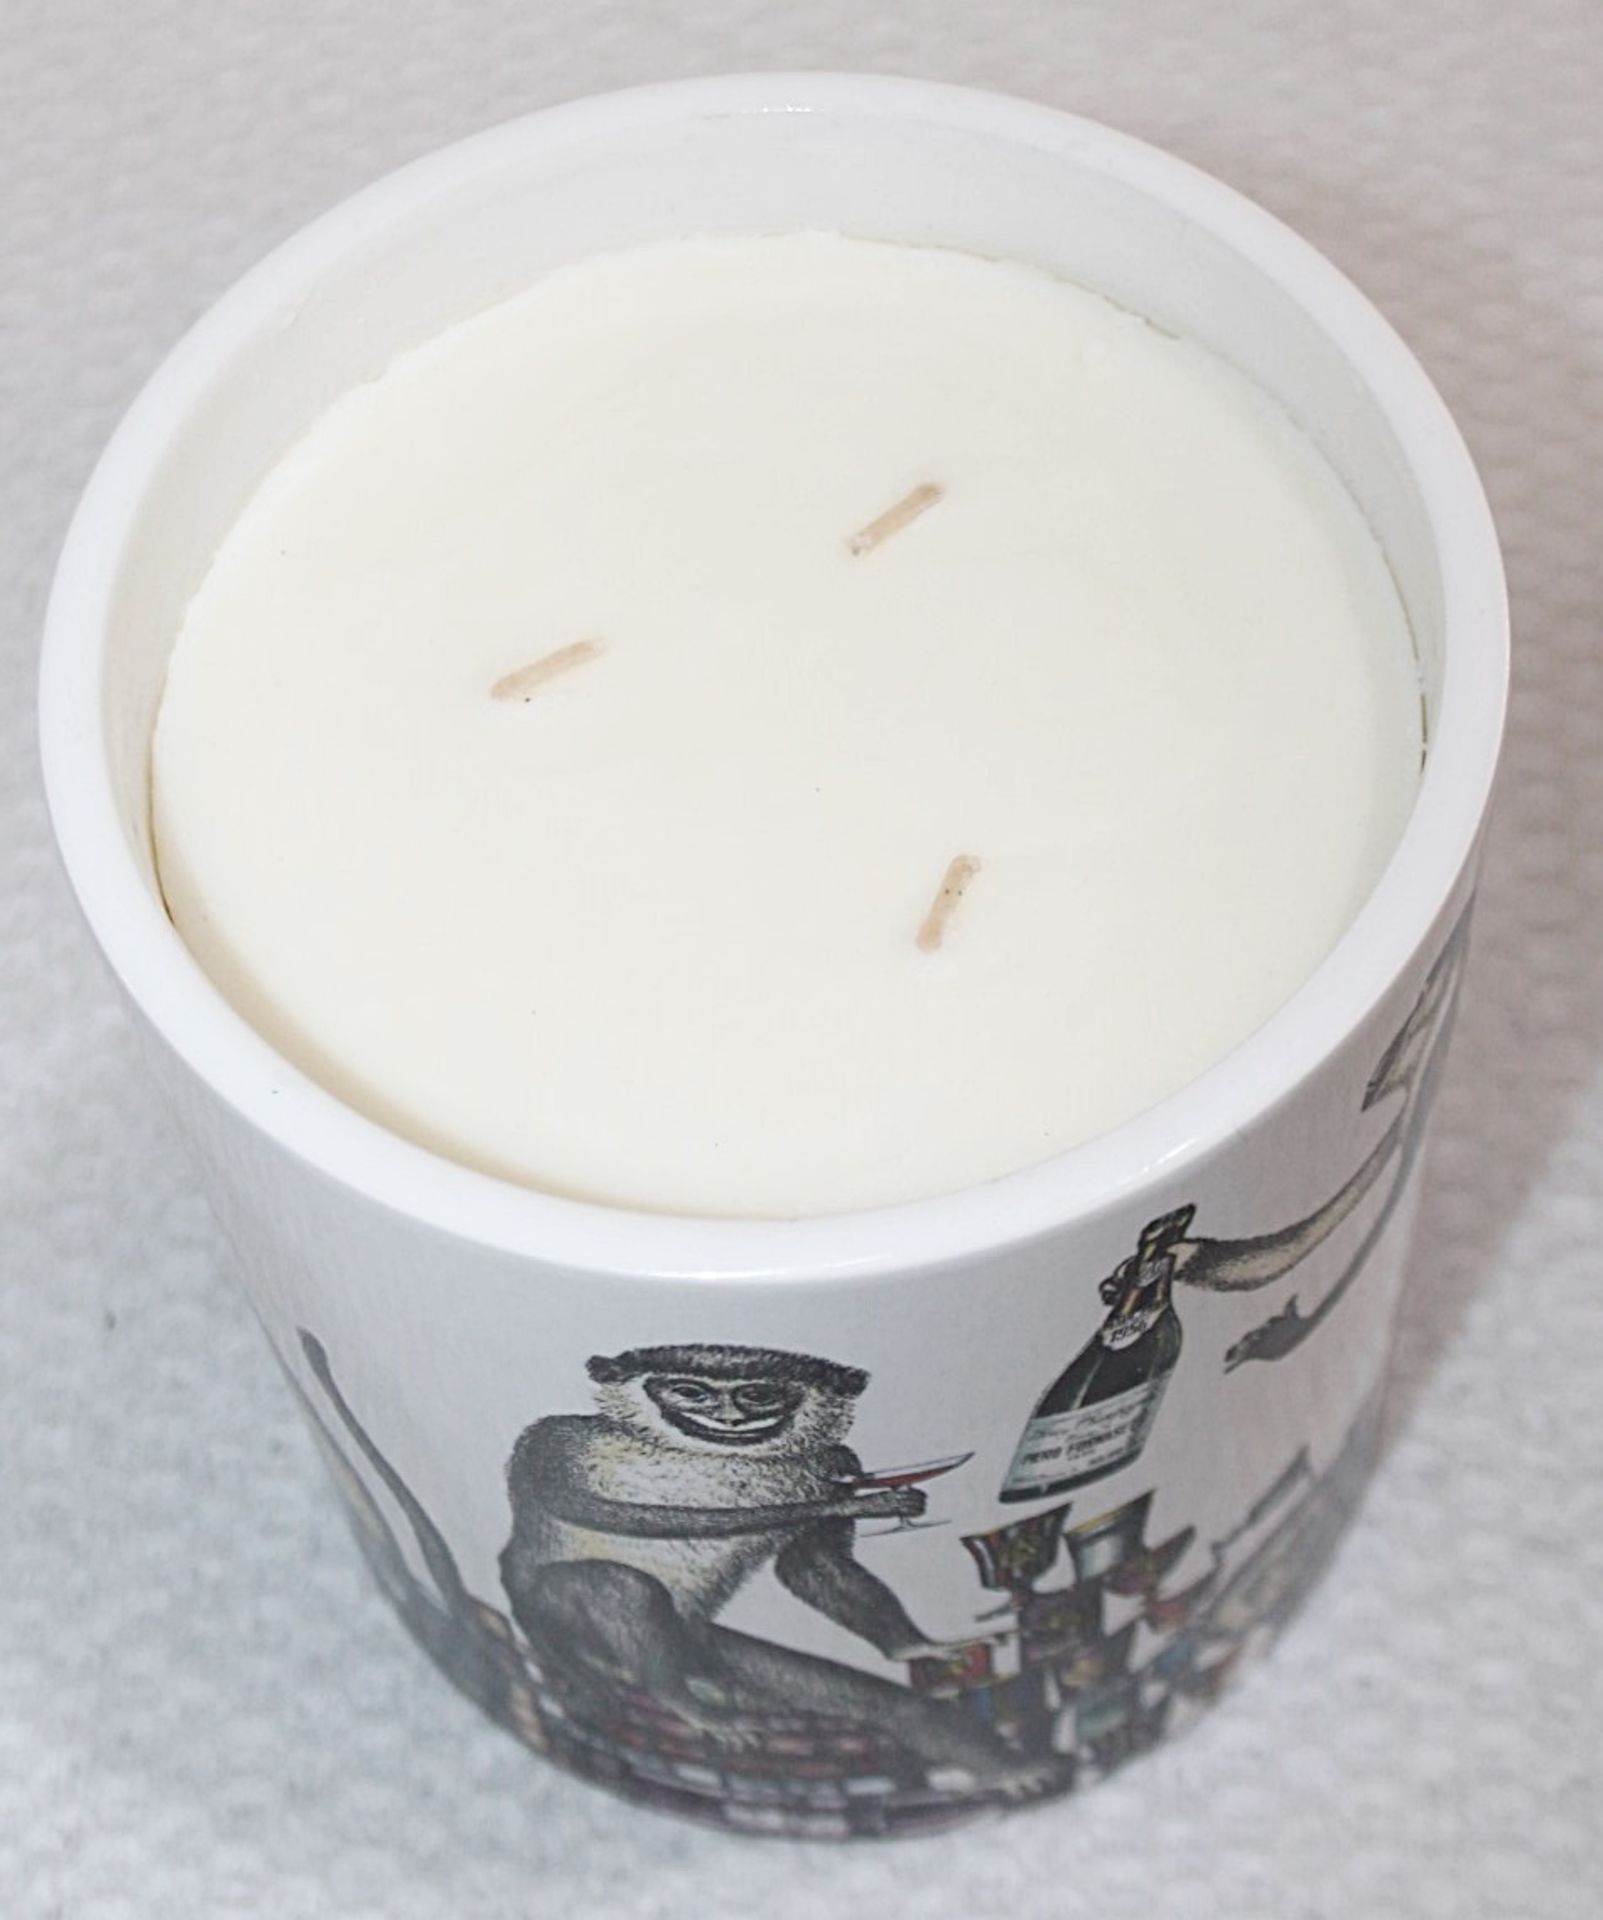 1 x FORNASETTI PROFUMI 'Scimmie' Large 1.9kg Luxury Scented Candle - Original Price £495.00 - Boxed - Image 5 of 9